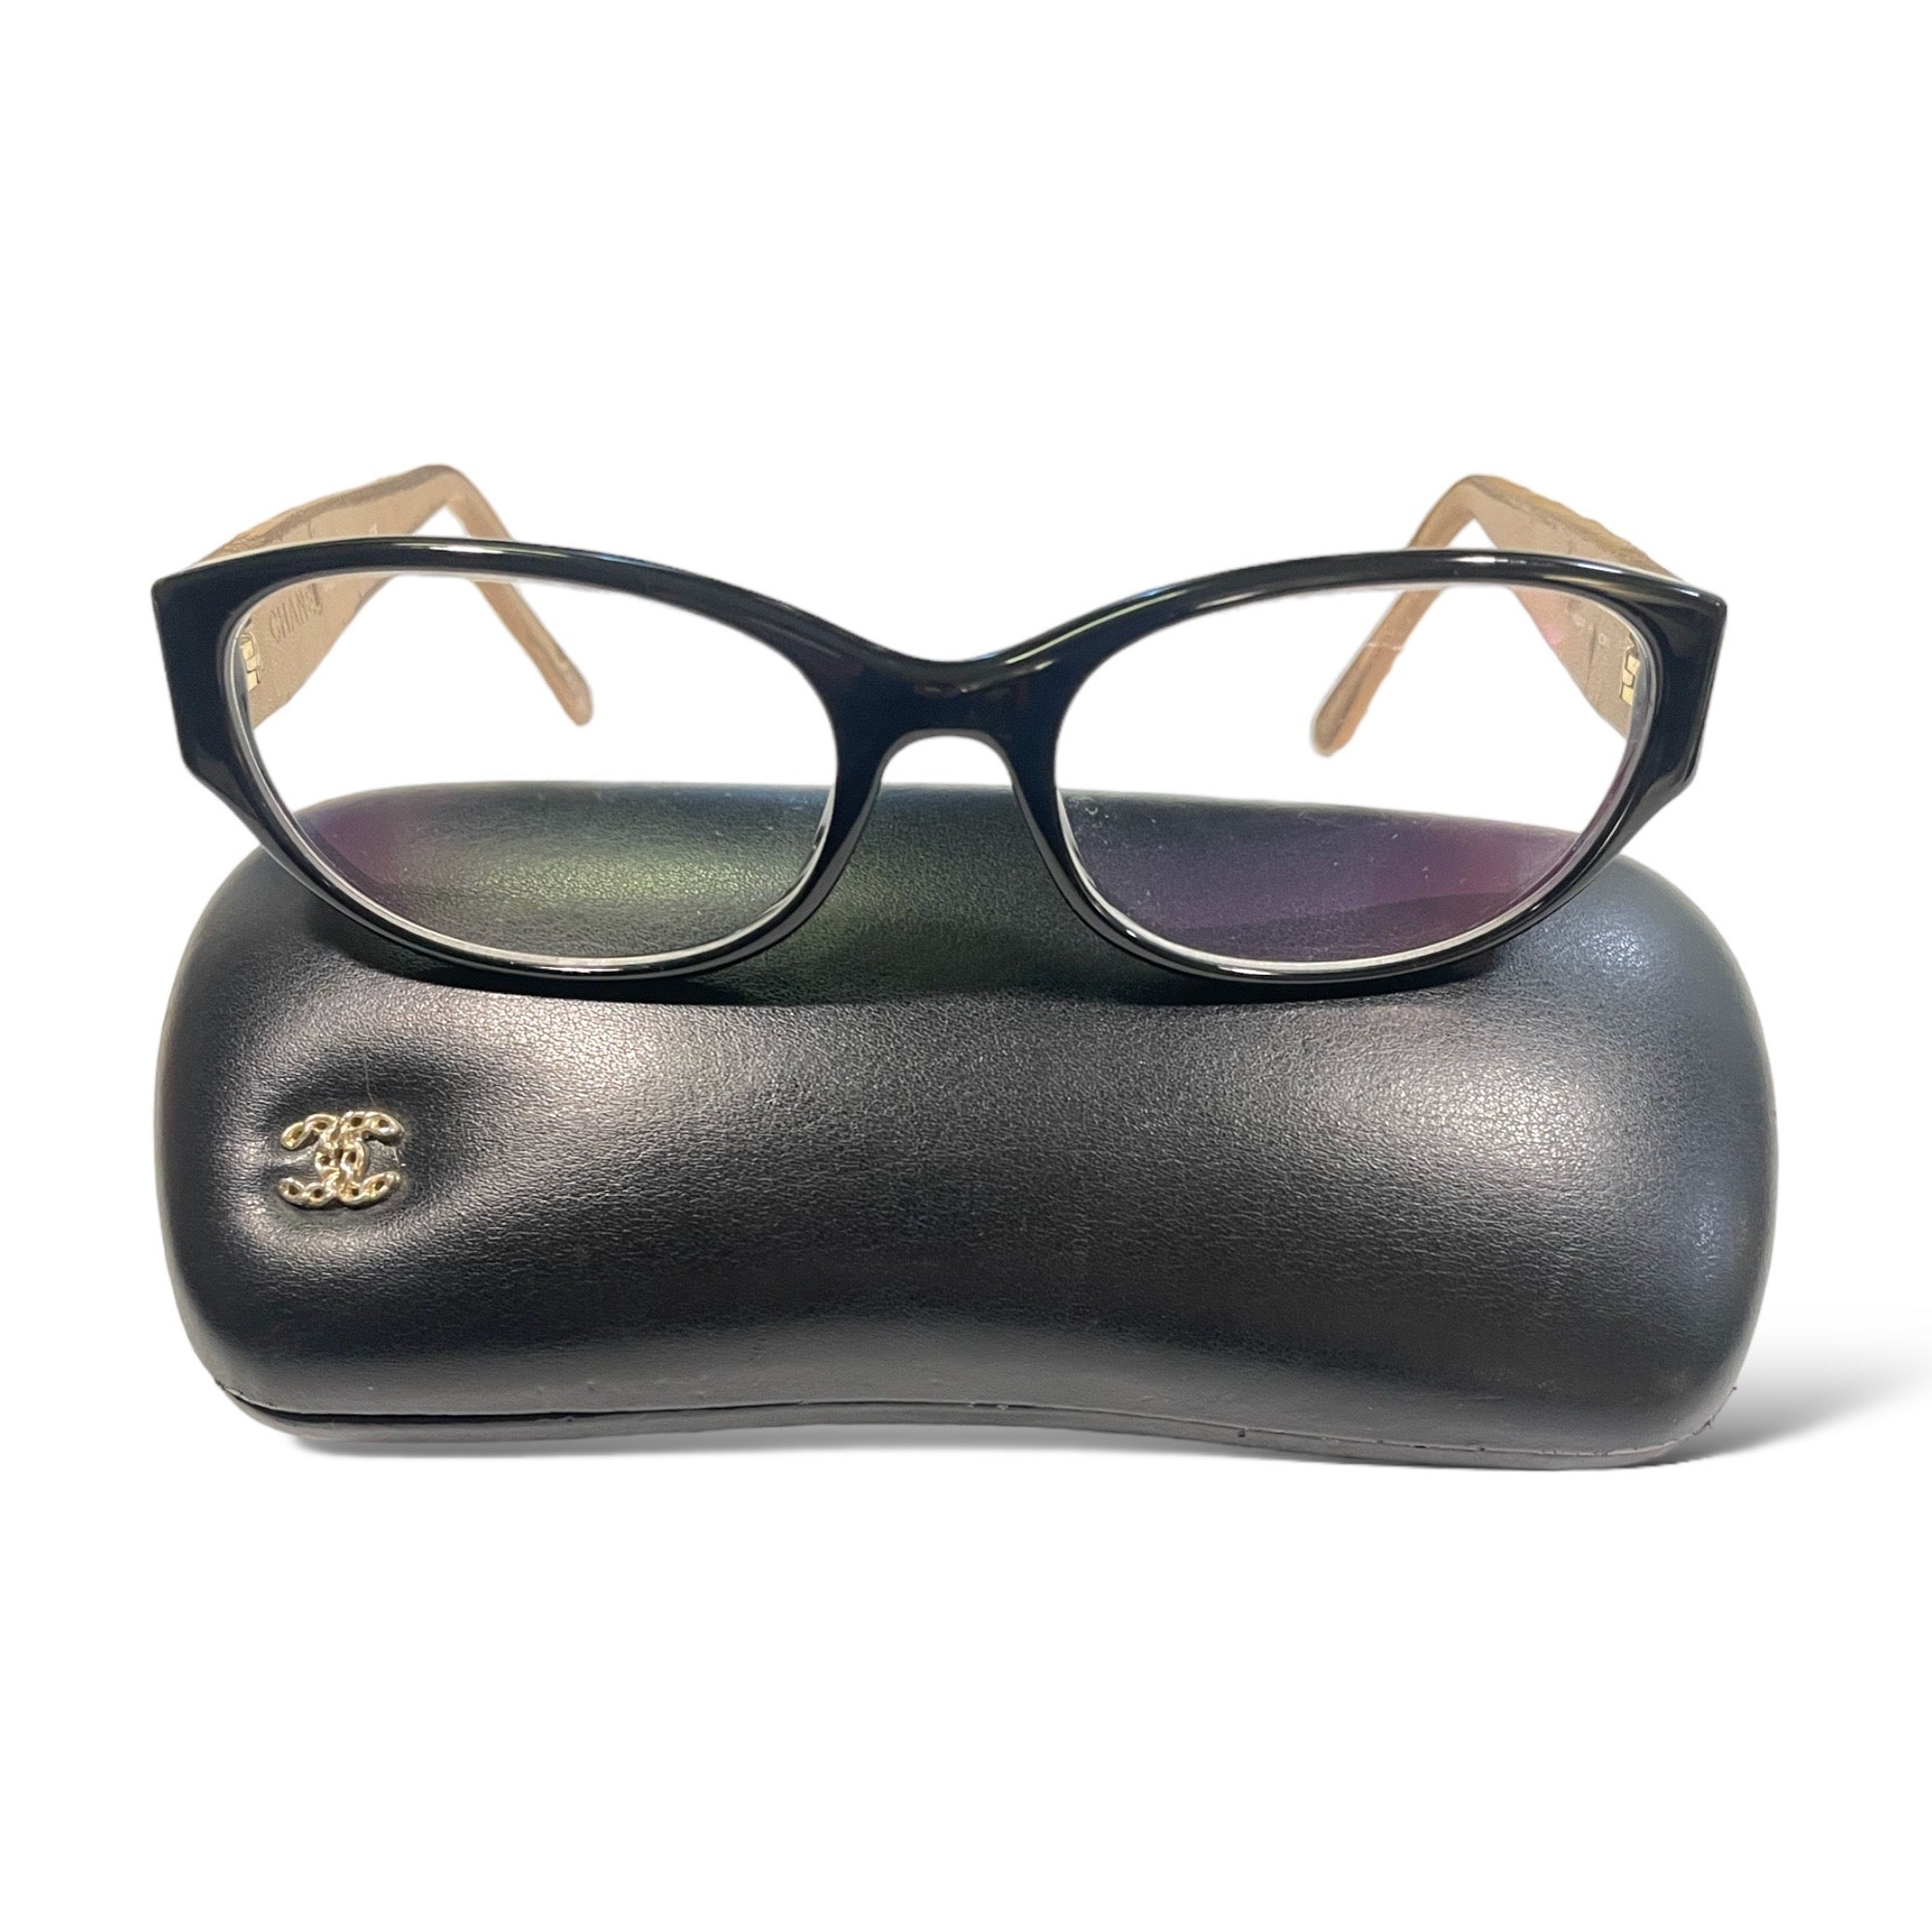 CHANEL Eyeglasses with Quilted leather temples & CC Motif on sides